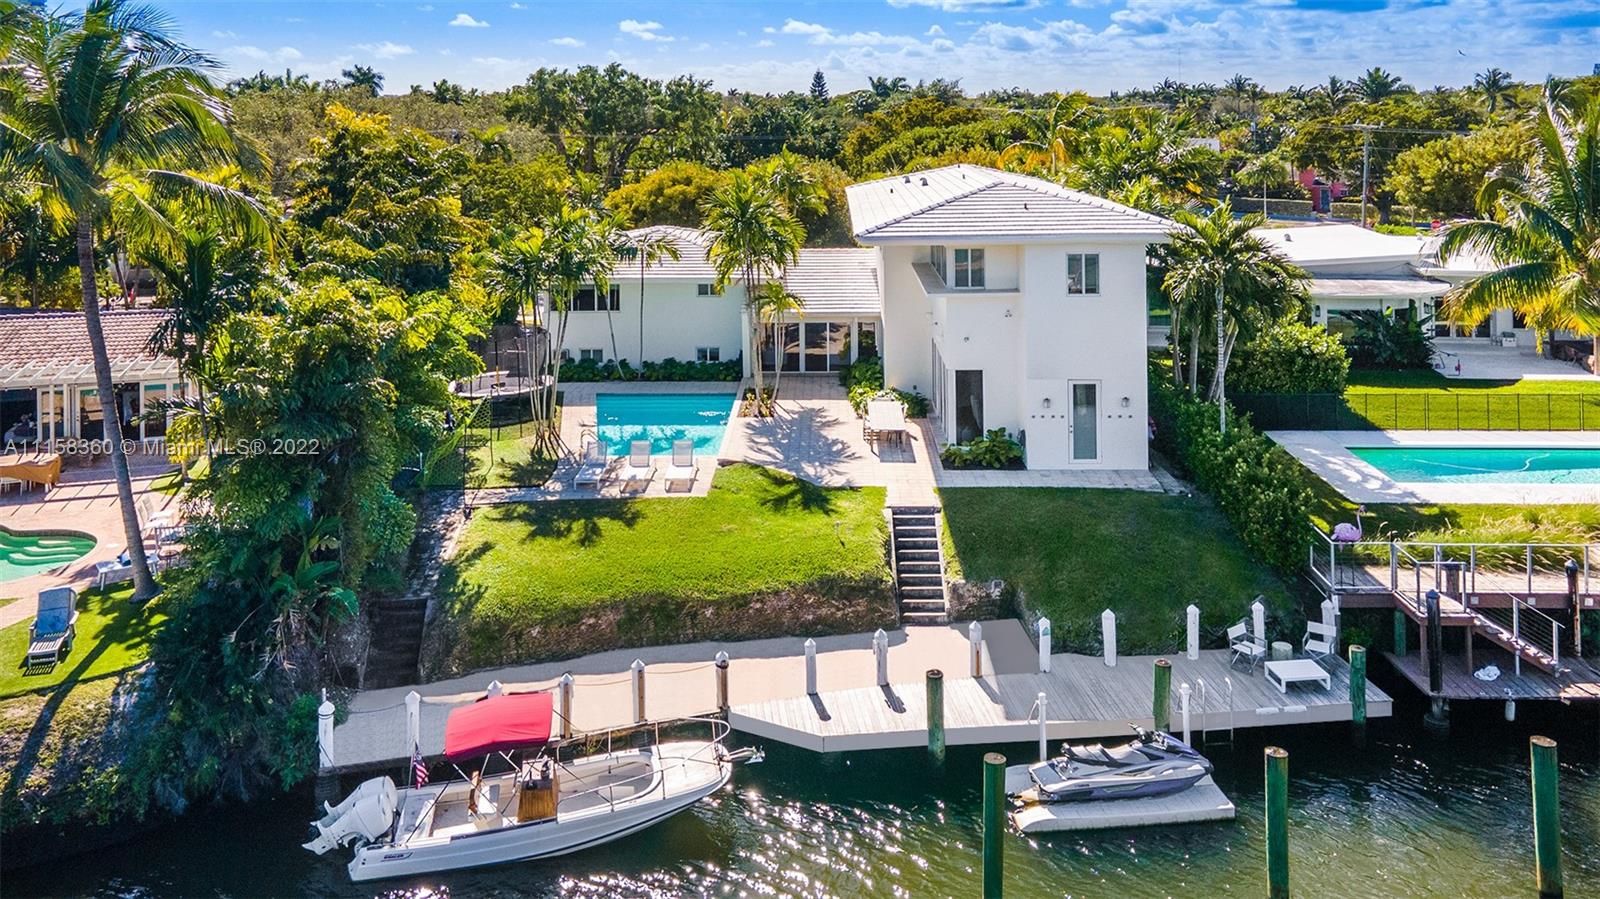 Bright, chic & renovated waterfront home built by famed architect Wahl Snyder w/ soaring ceilings, heated pool & no bridges! Located in guard gated and family-friendly Belle Meade! High elevation, flood insurance is only $700/year. Move-in ready, gut-renovation in 2015 by design firm DKOR w/ $400K+ in additional improvements made in 2020. Open & spacious layout w/ brilliant flow from the grand entryway featuring 27 ft ceilings to formal living room, dining room, eat-in kitchen & family room each w/ 12+ ft ceilings, custom office plus bonus room/gym equipped w/ laundry room & ample built-in storage throughout. The grand primary suite features abundant walk-in closets and custom spa bathroom designed by Ann Sacks.